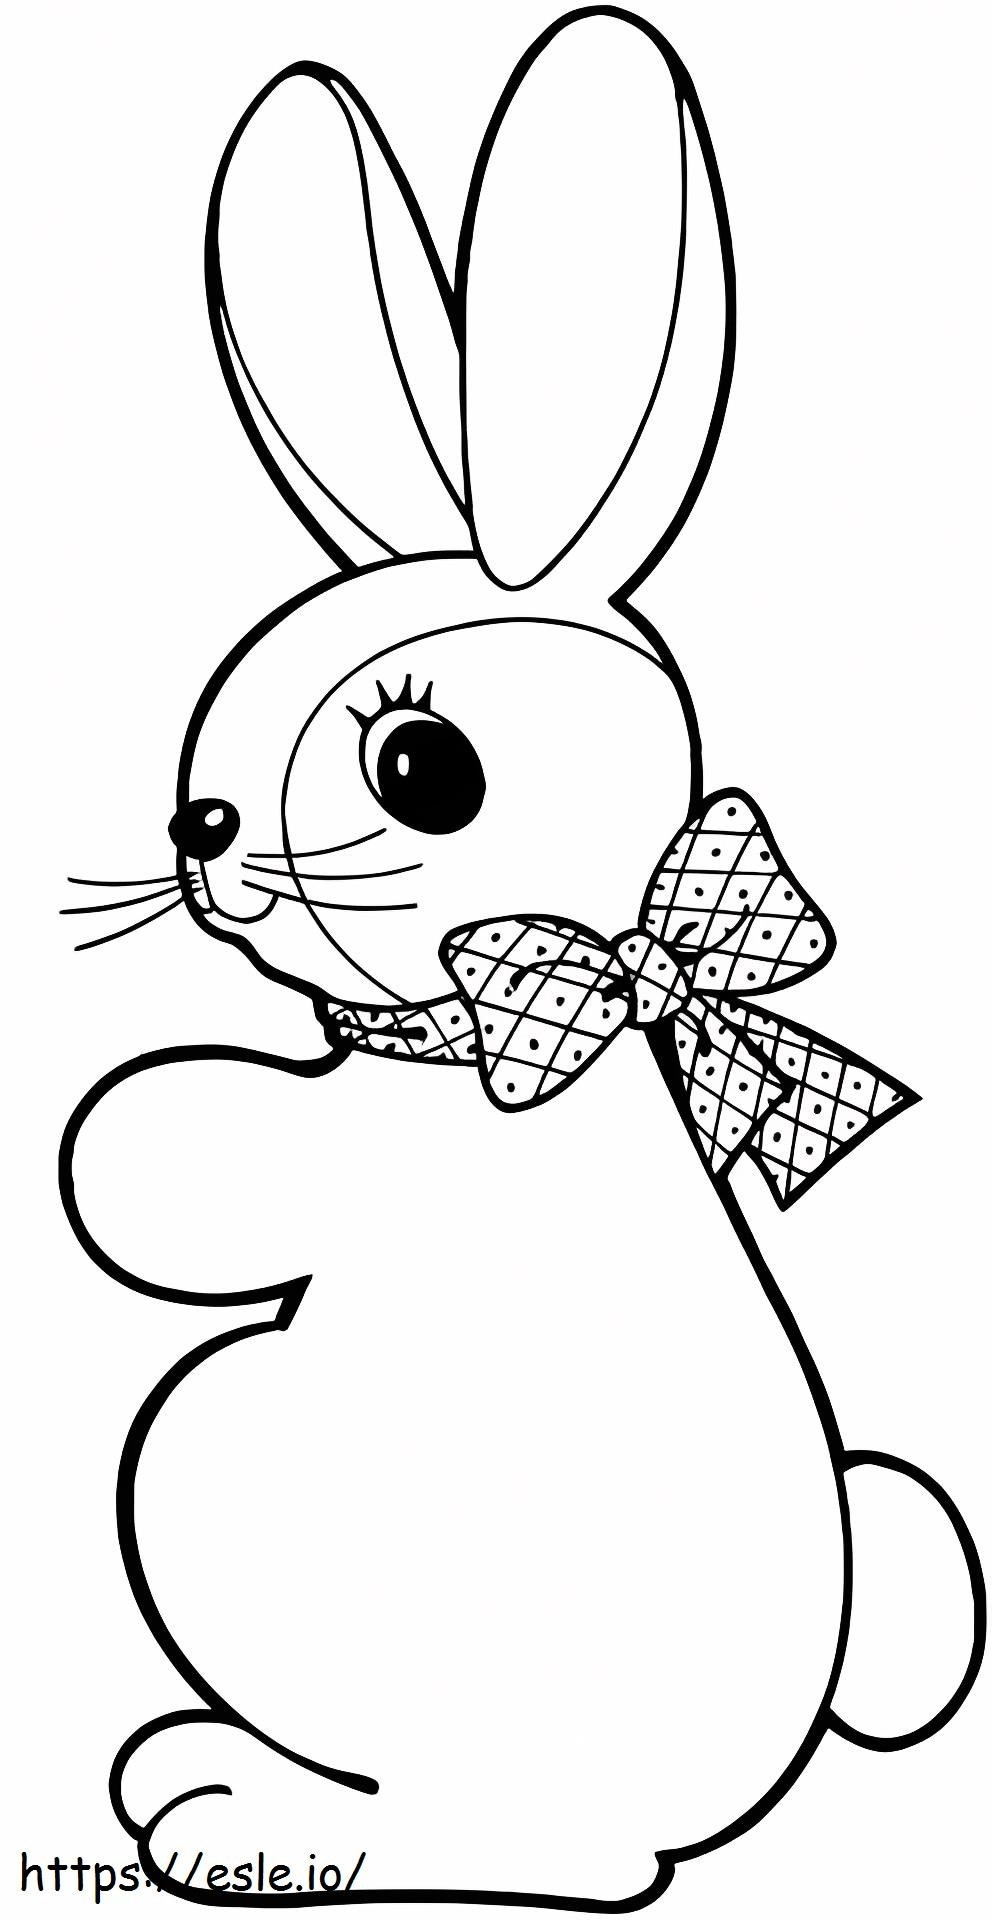 1532801365 Lovely Rabbit A4 coloring page